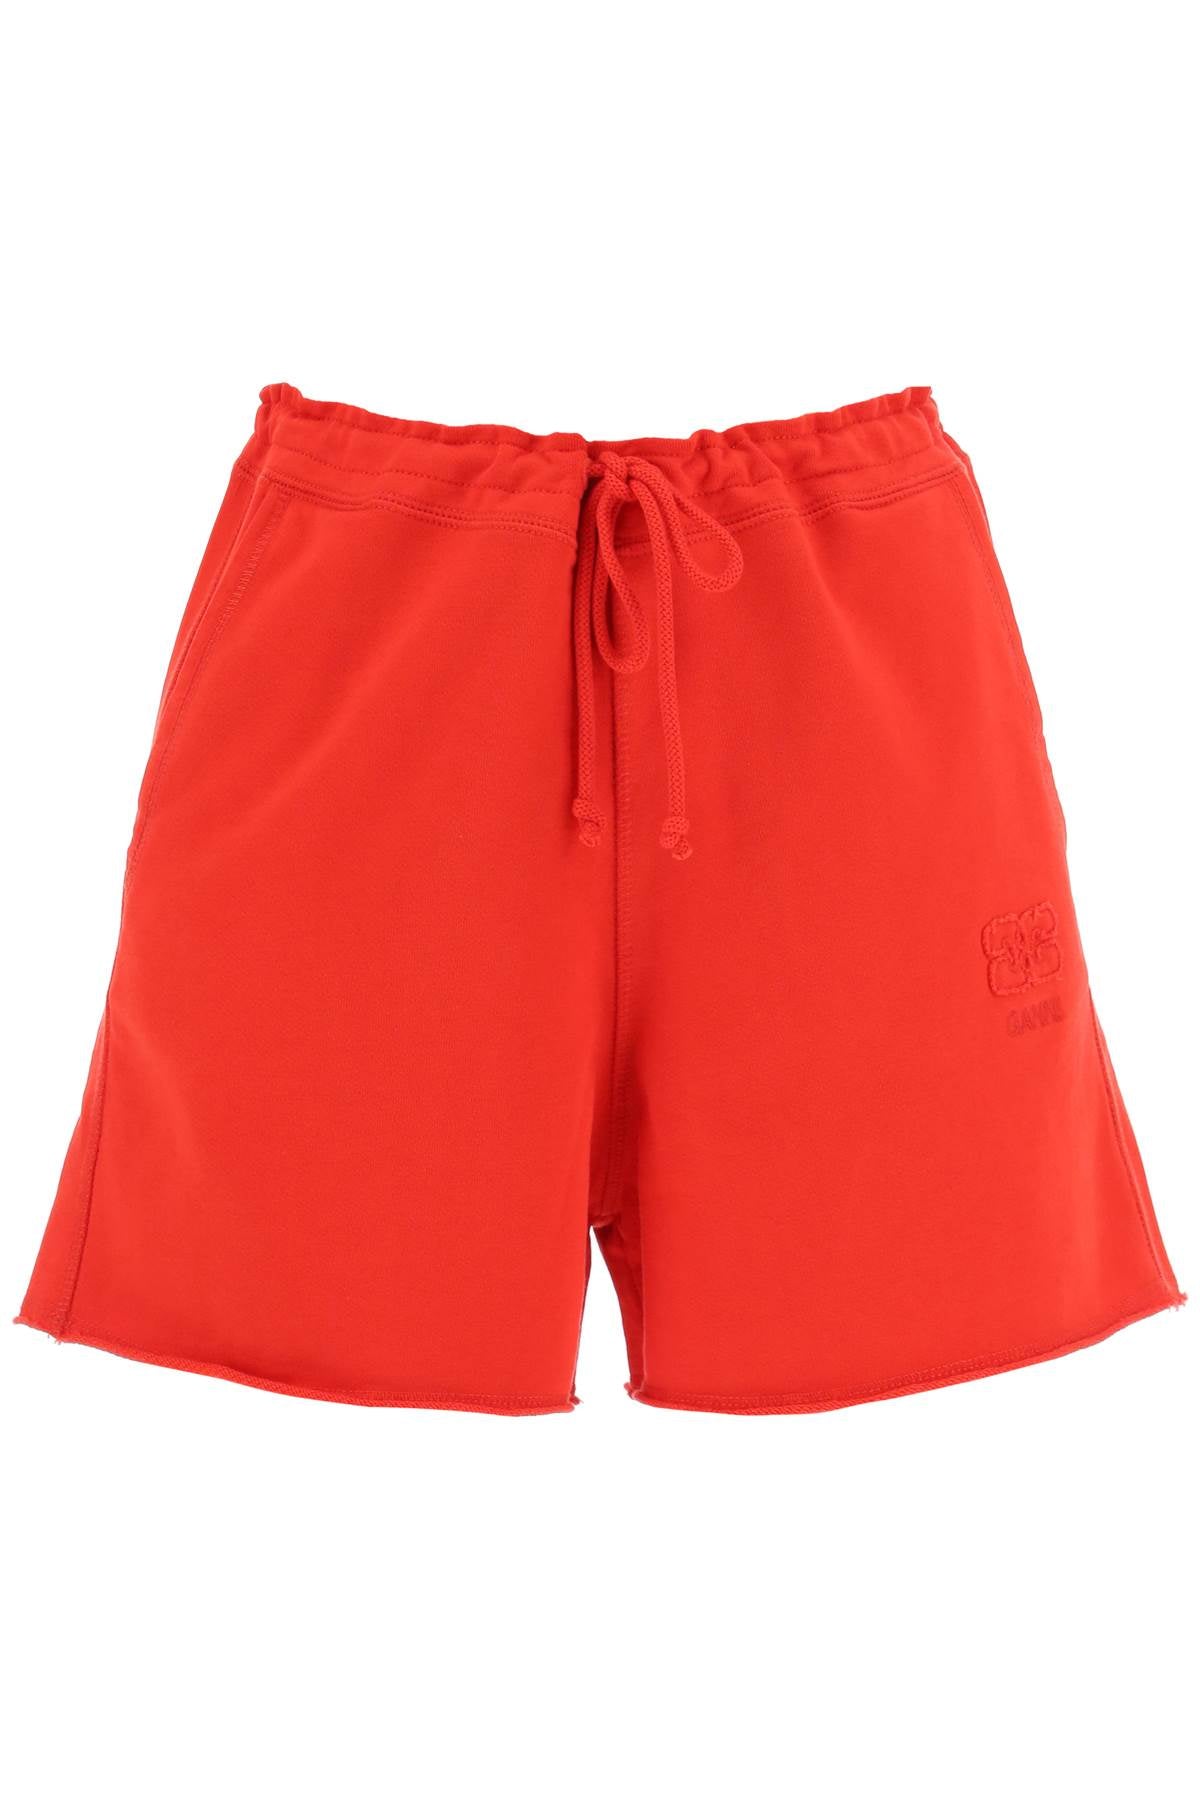 Racing Red Red Isoli Drawstring Shorts